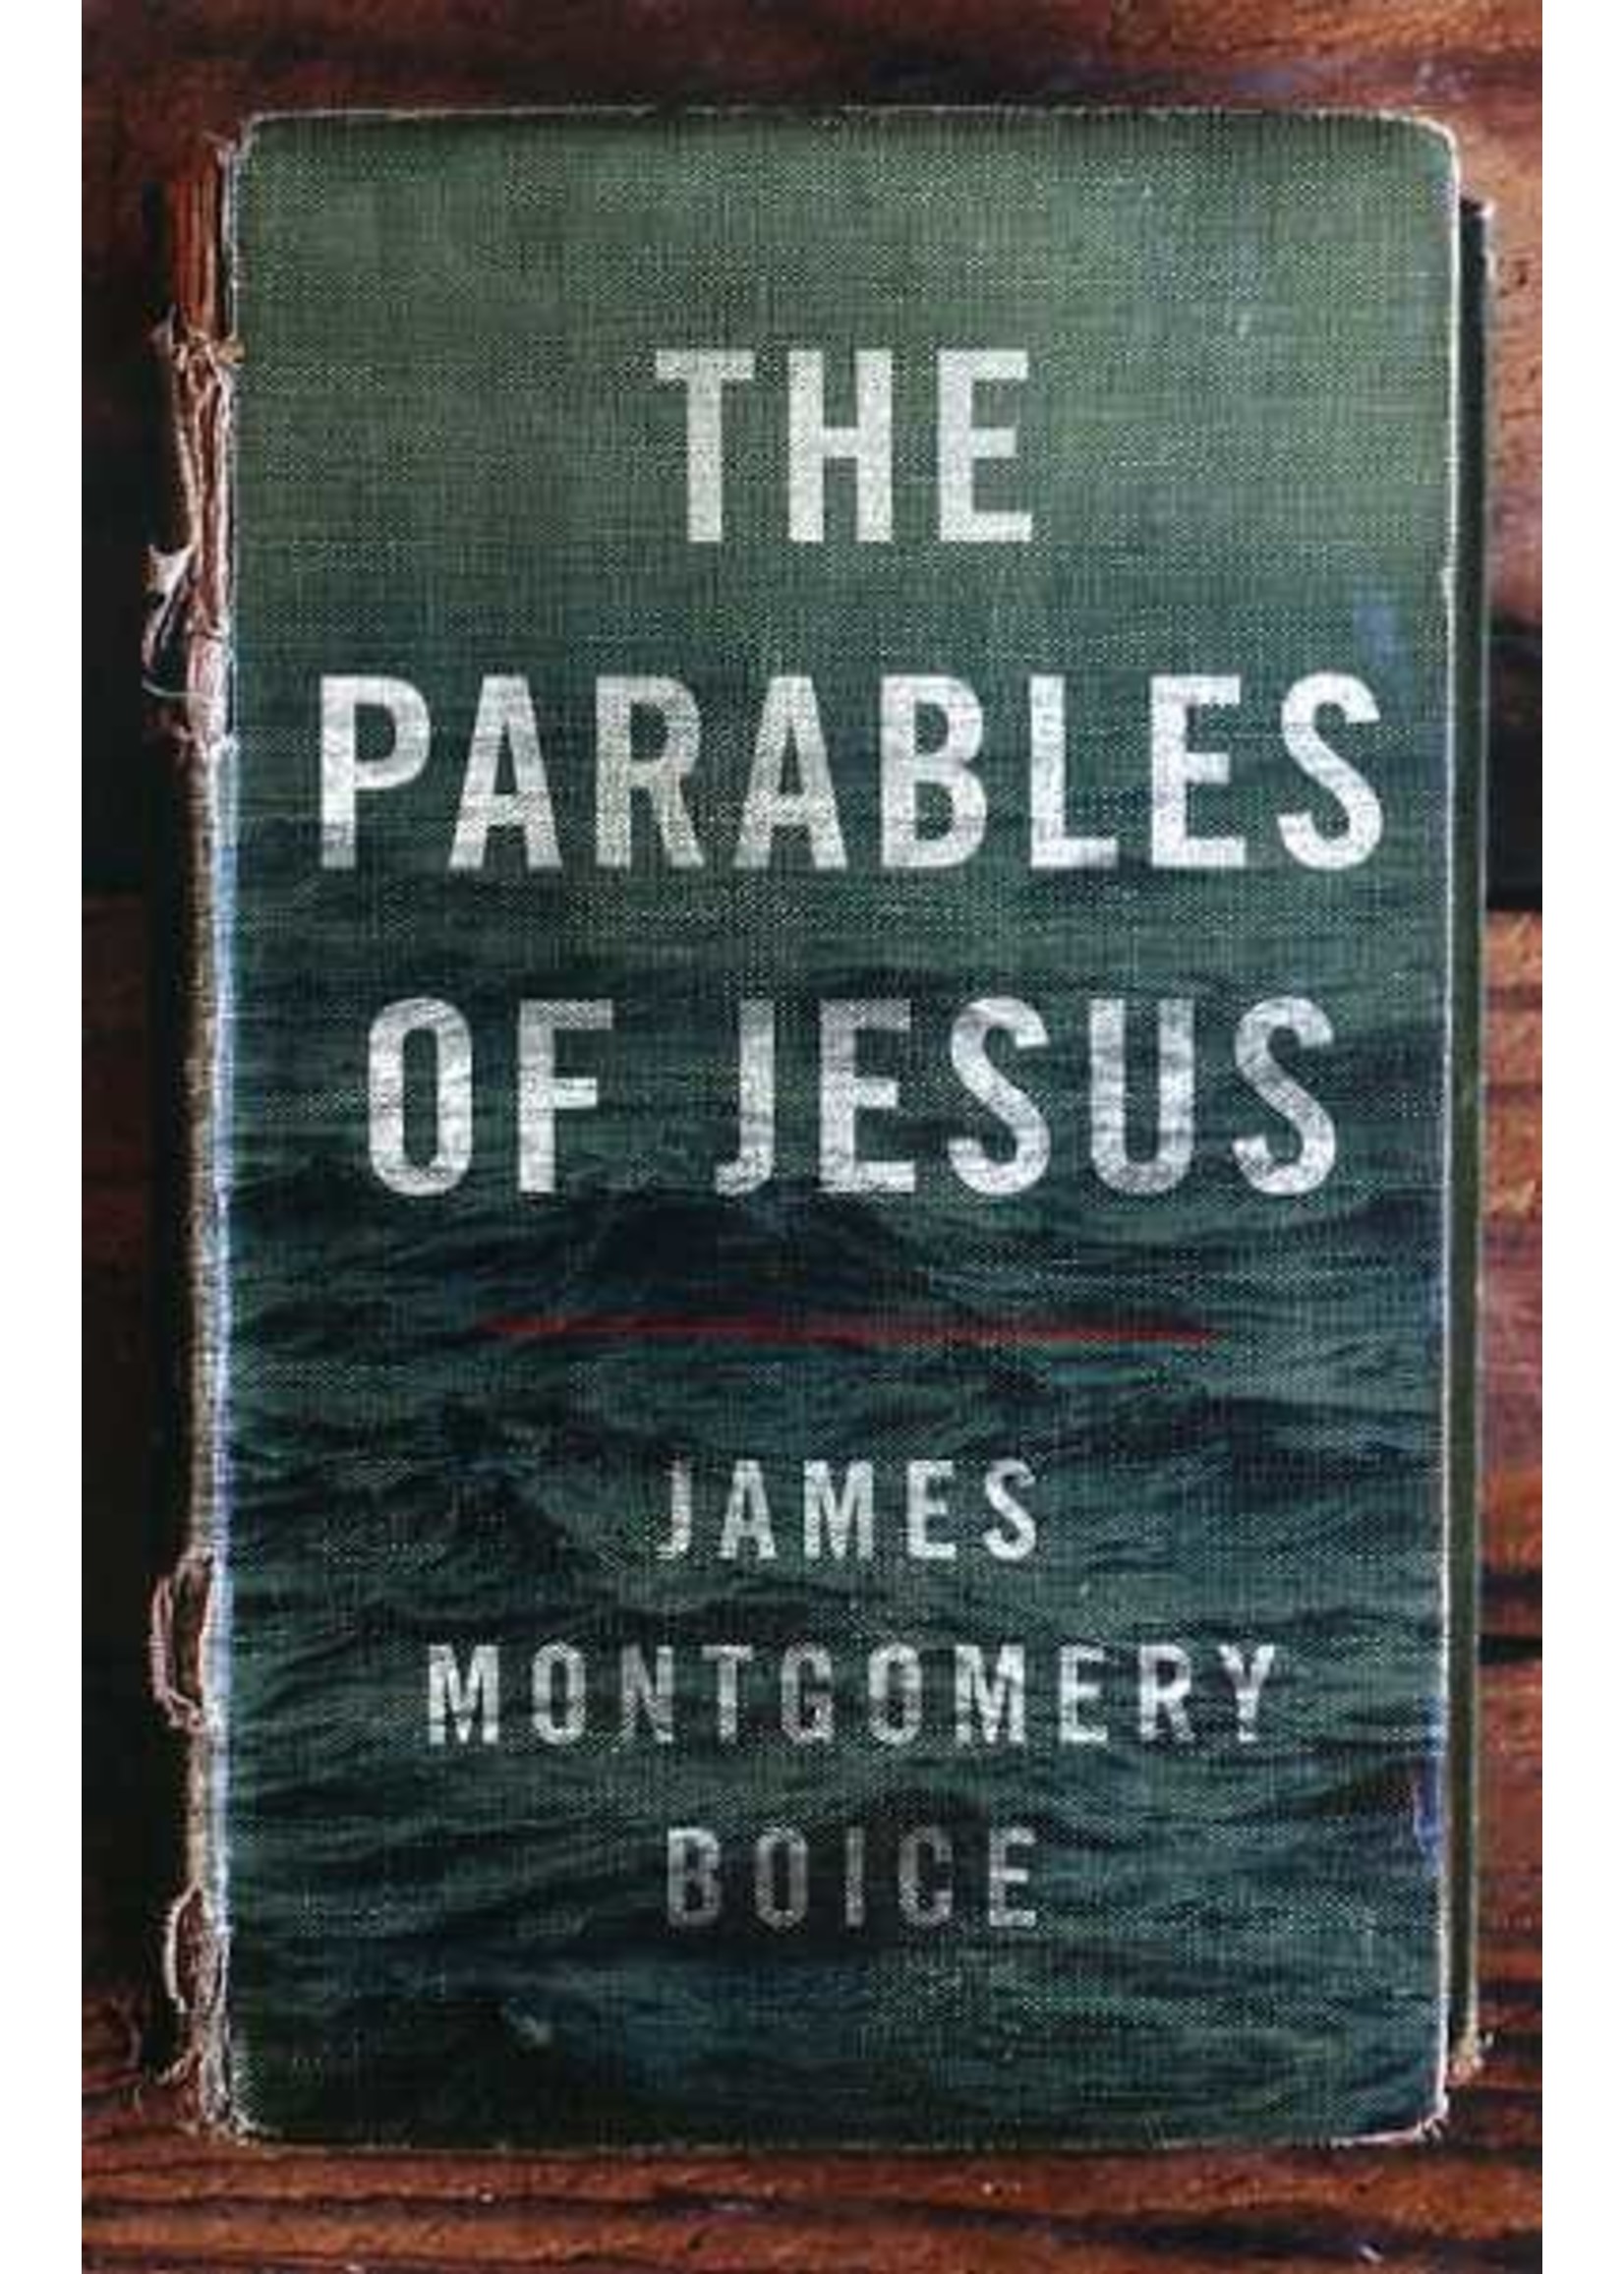 Moody Publishers The Parables of Jesus - James Boice